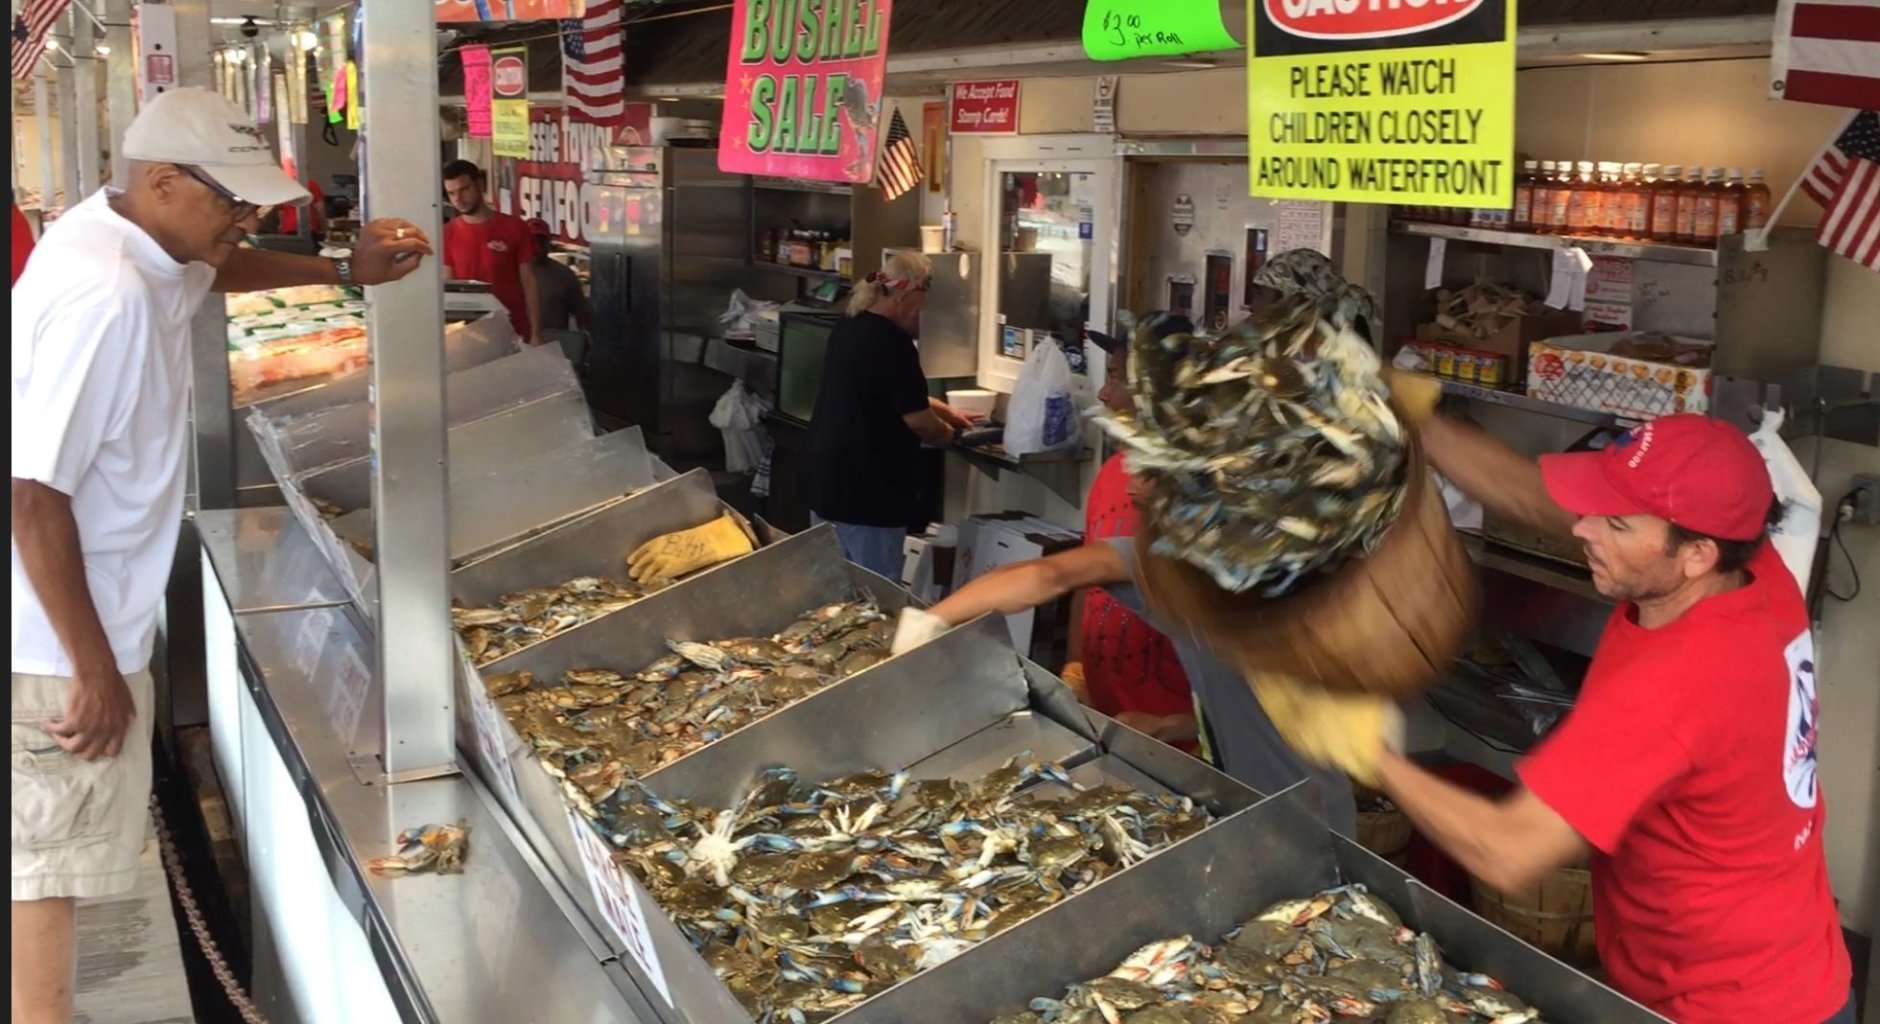 To supplement the number of crabs stocked from the Chesapeake Bay, Jessie Taylor's Seafood is getting them from the Carolinas and a far away as Louisiana and Florida. (WTOP/Kristi King)